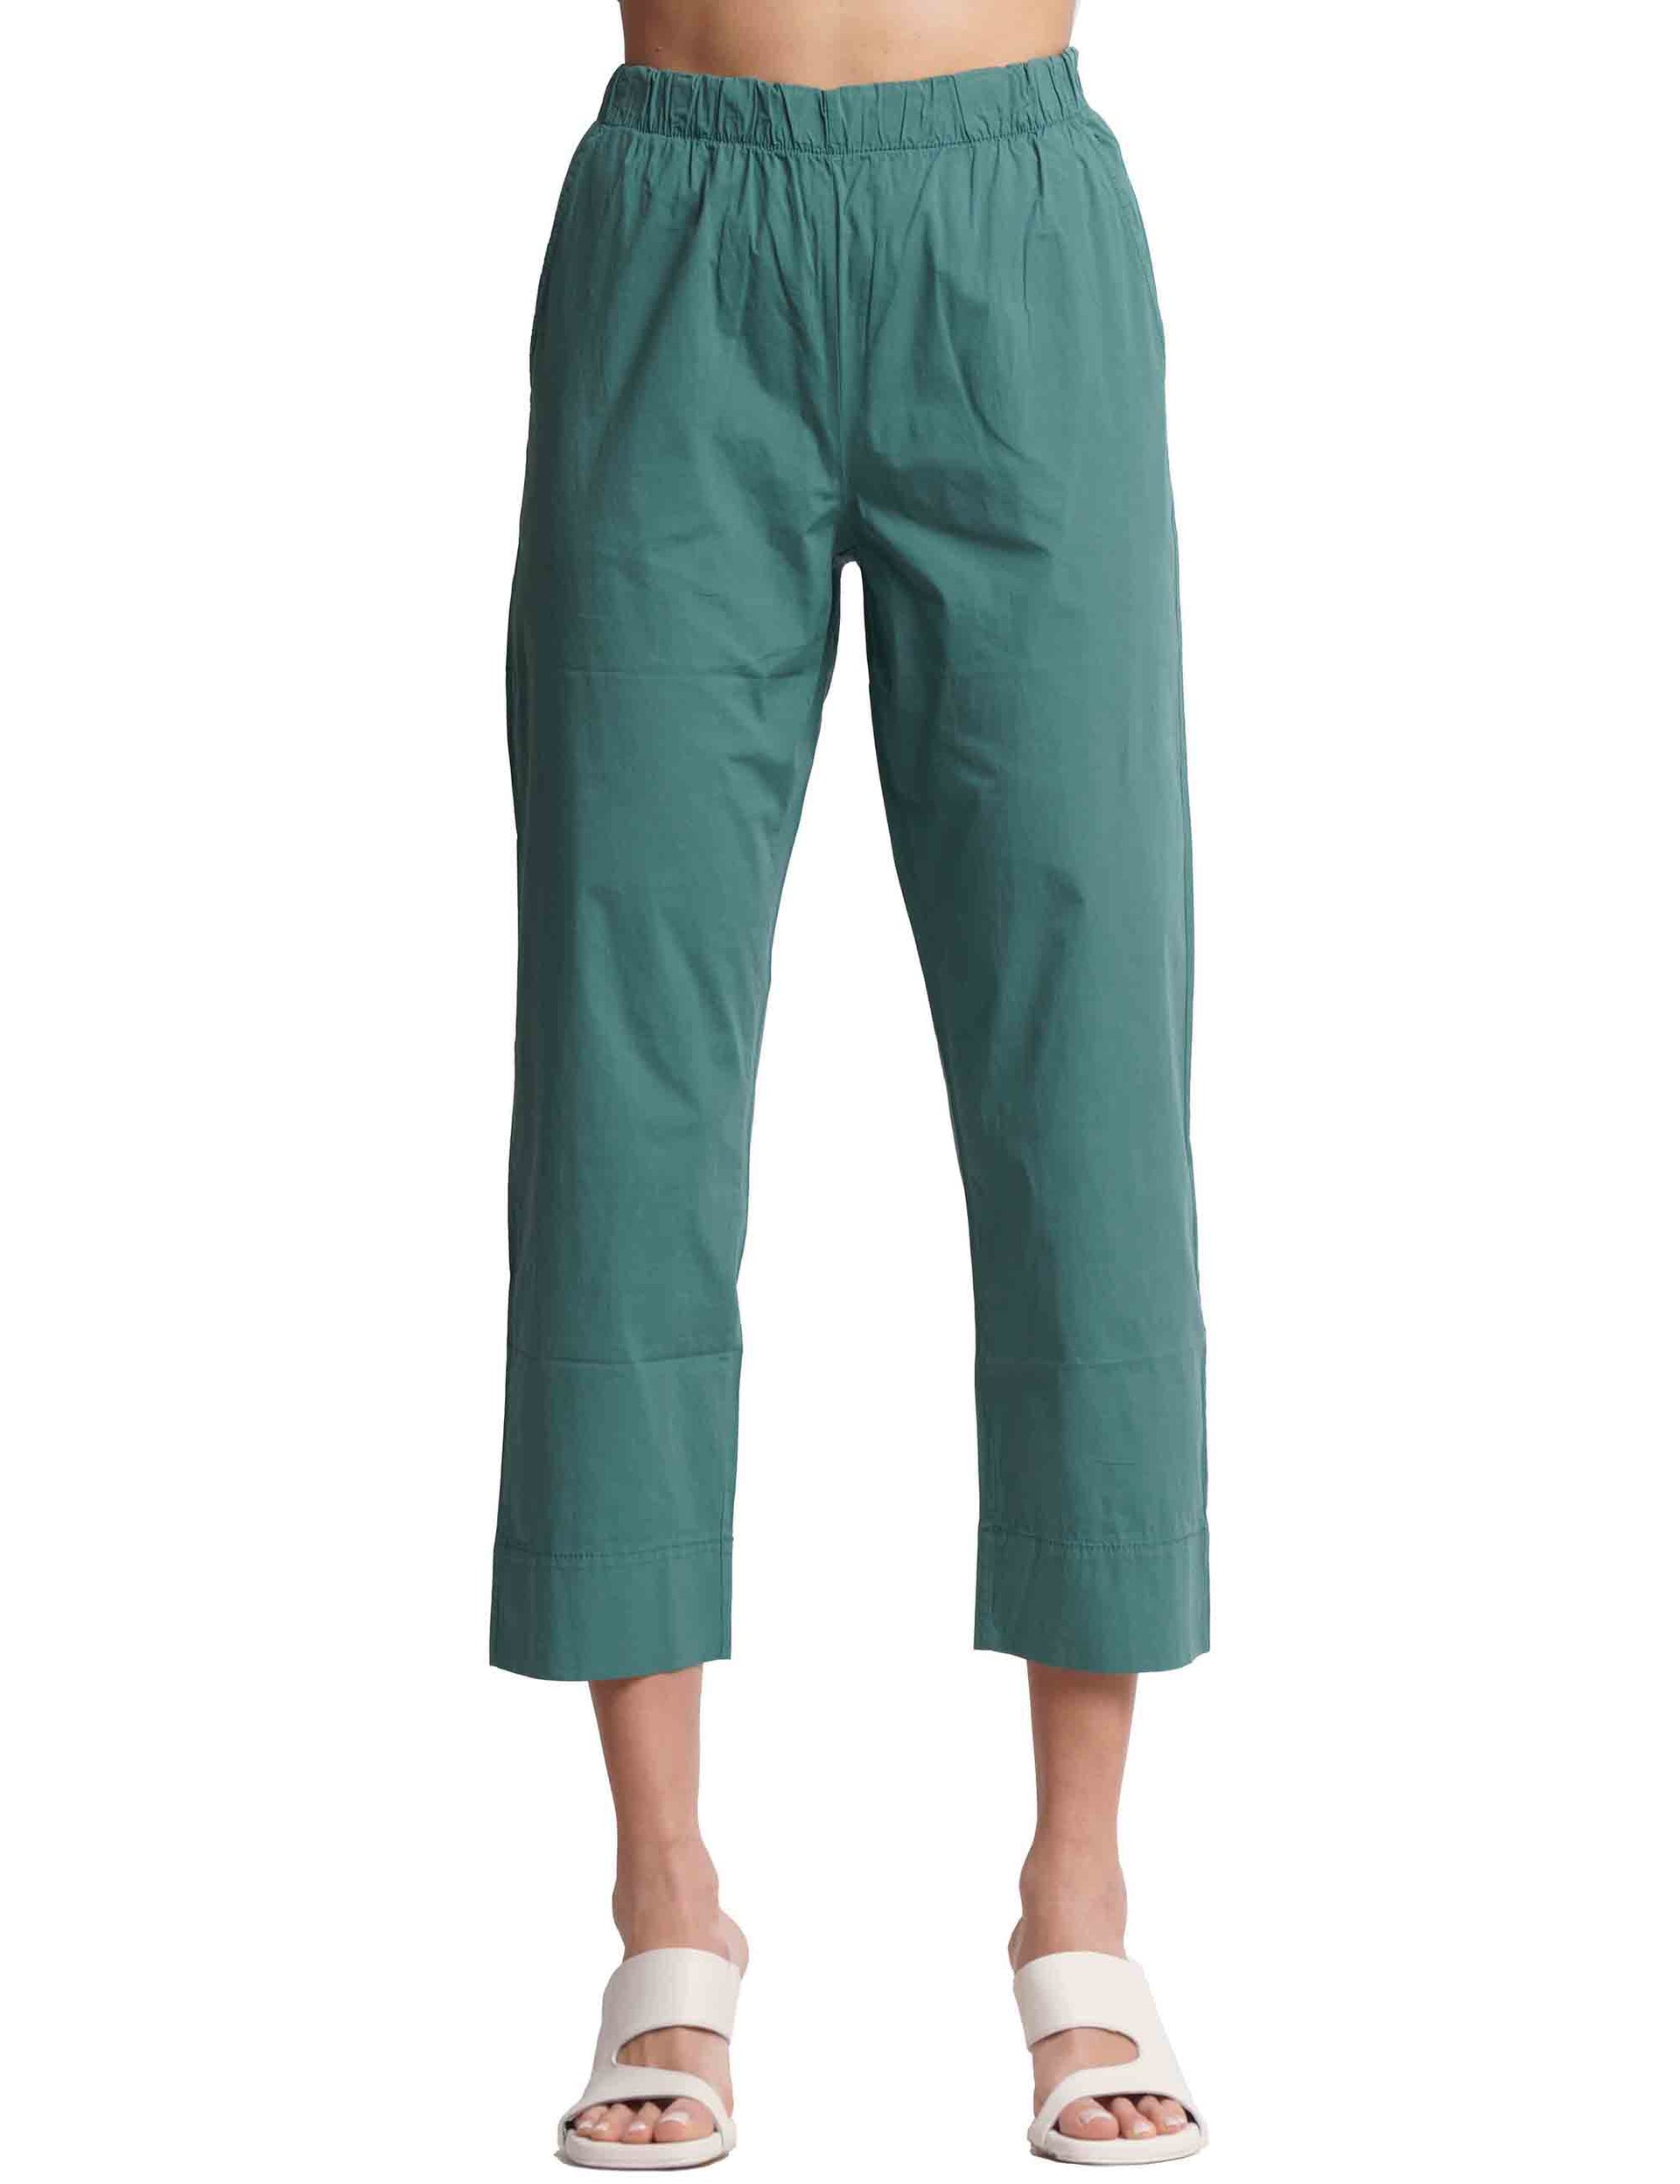 Women's green cotton trousers with elastic waist